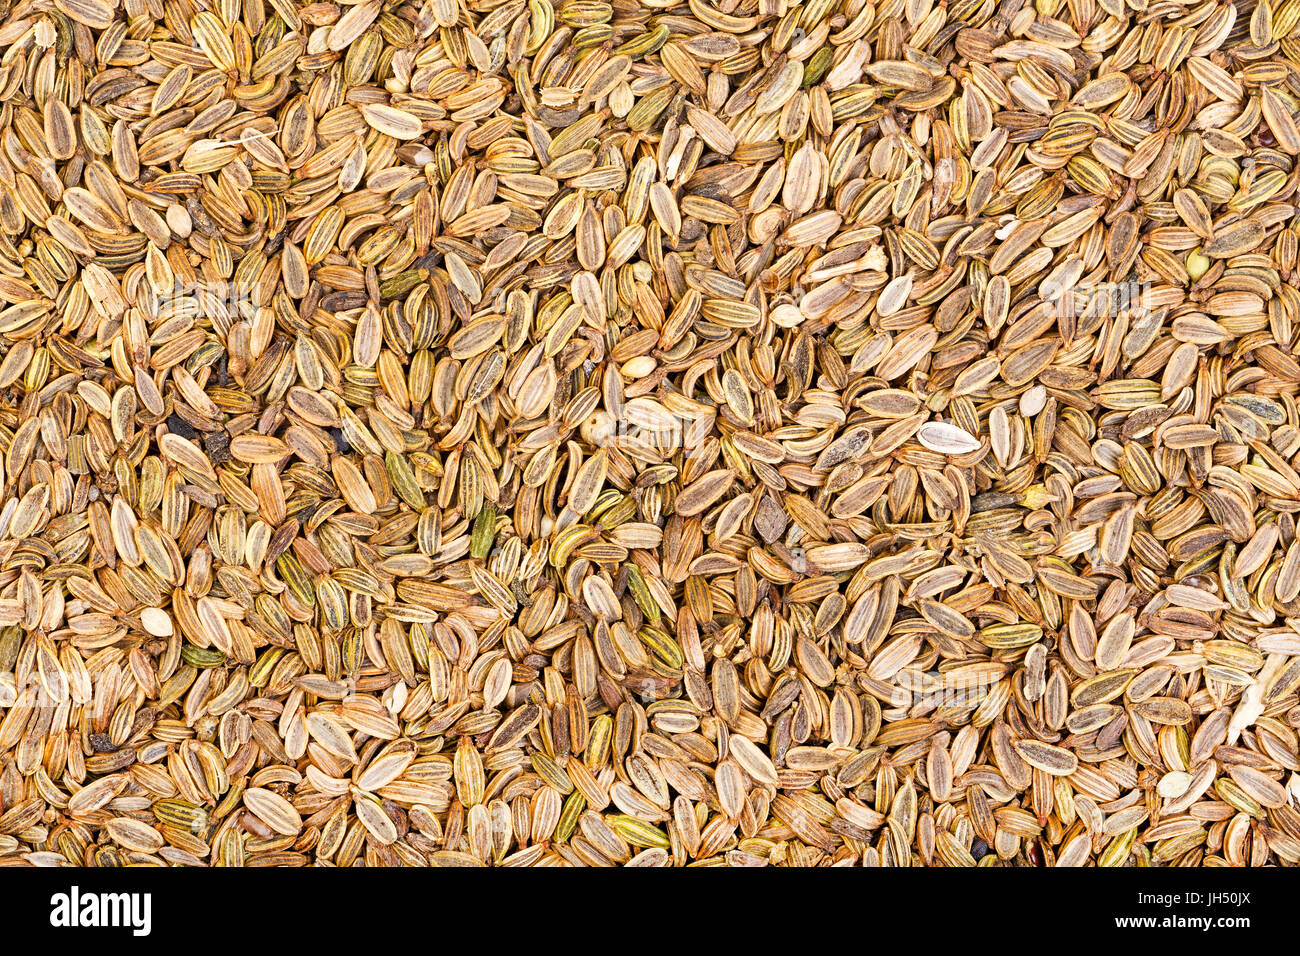 Dried fennel seeds background. Stock Photo